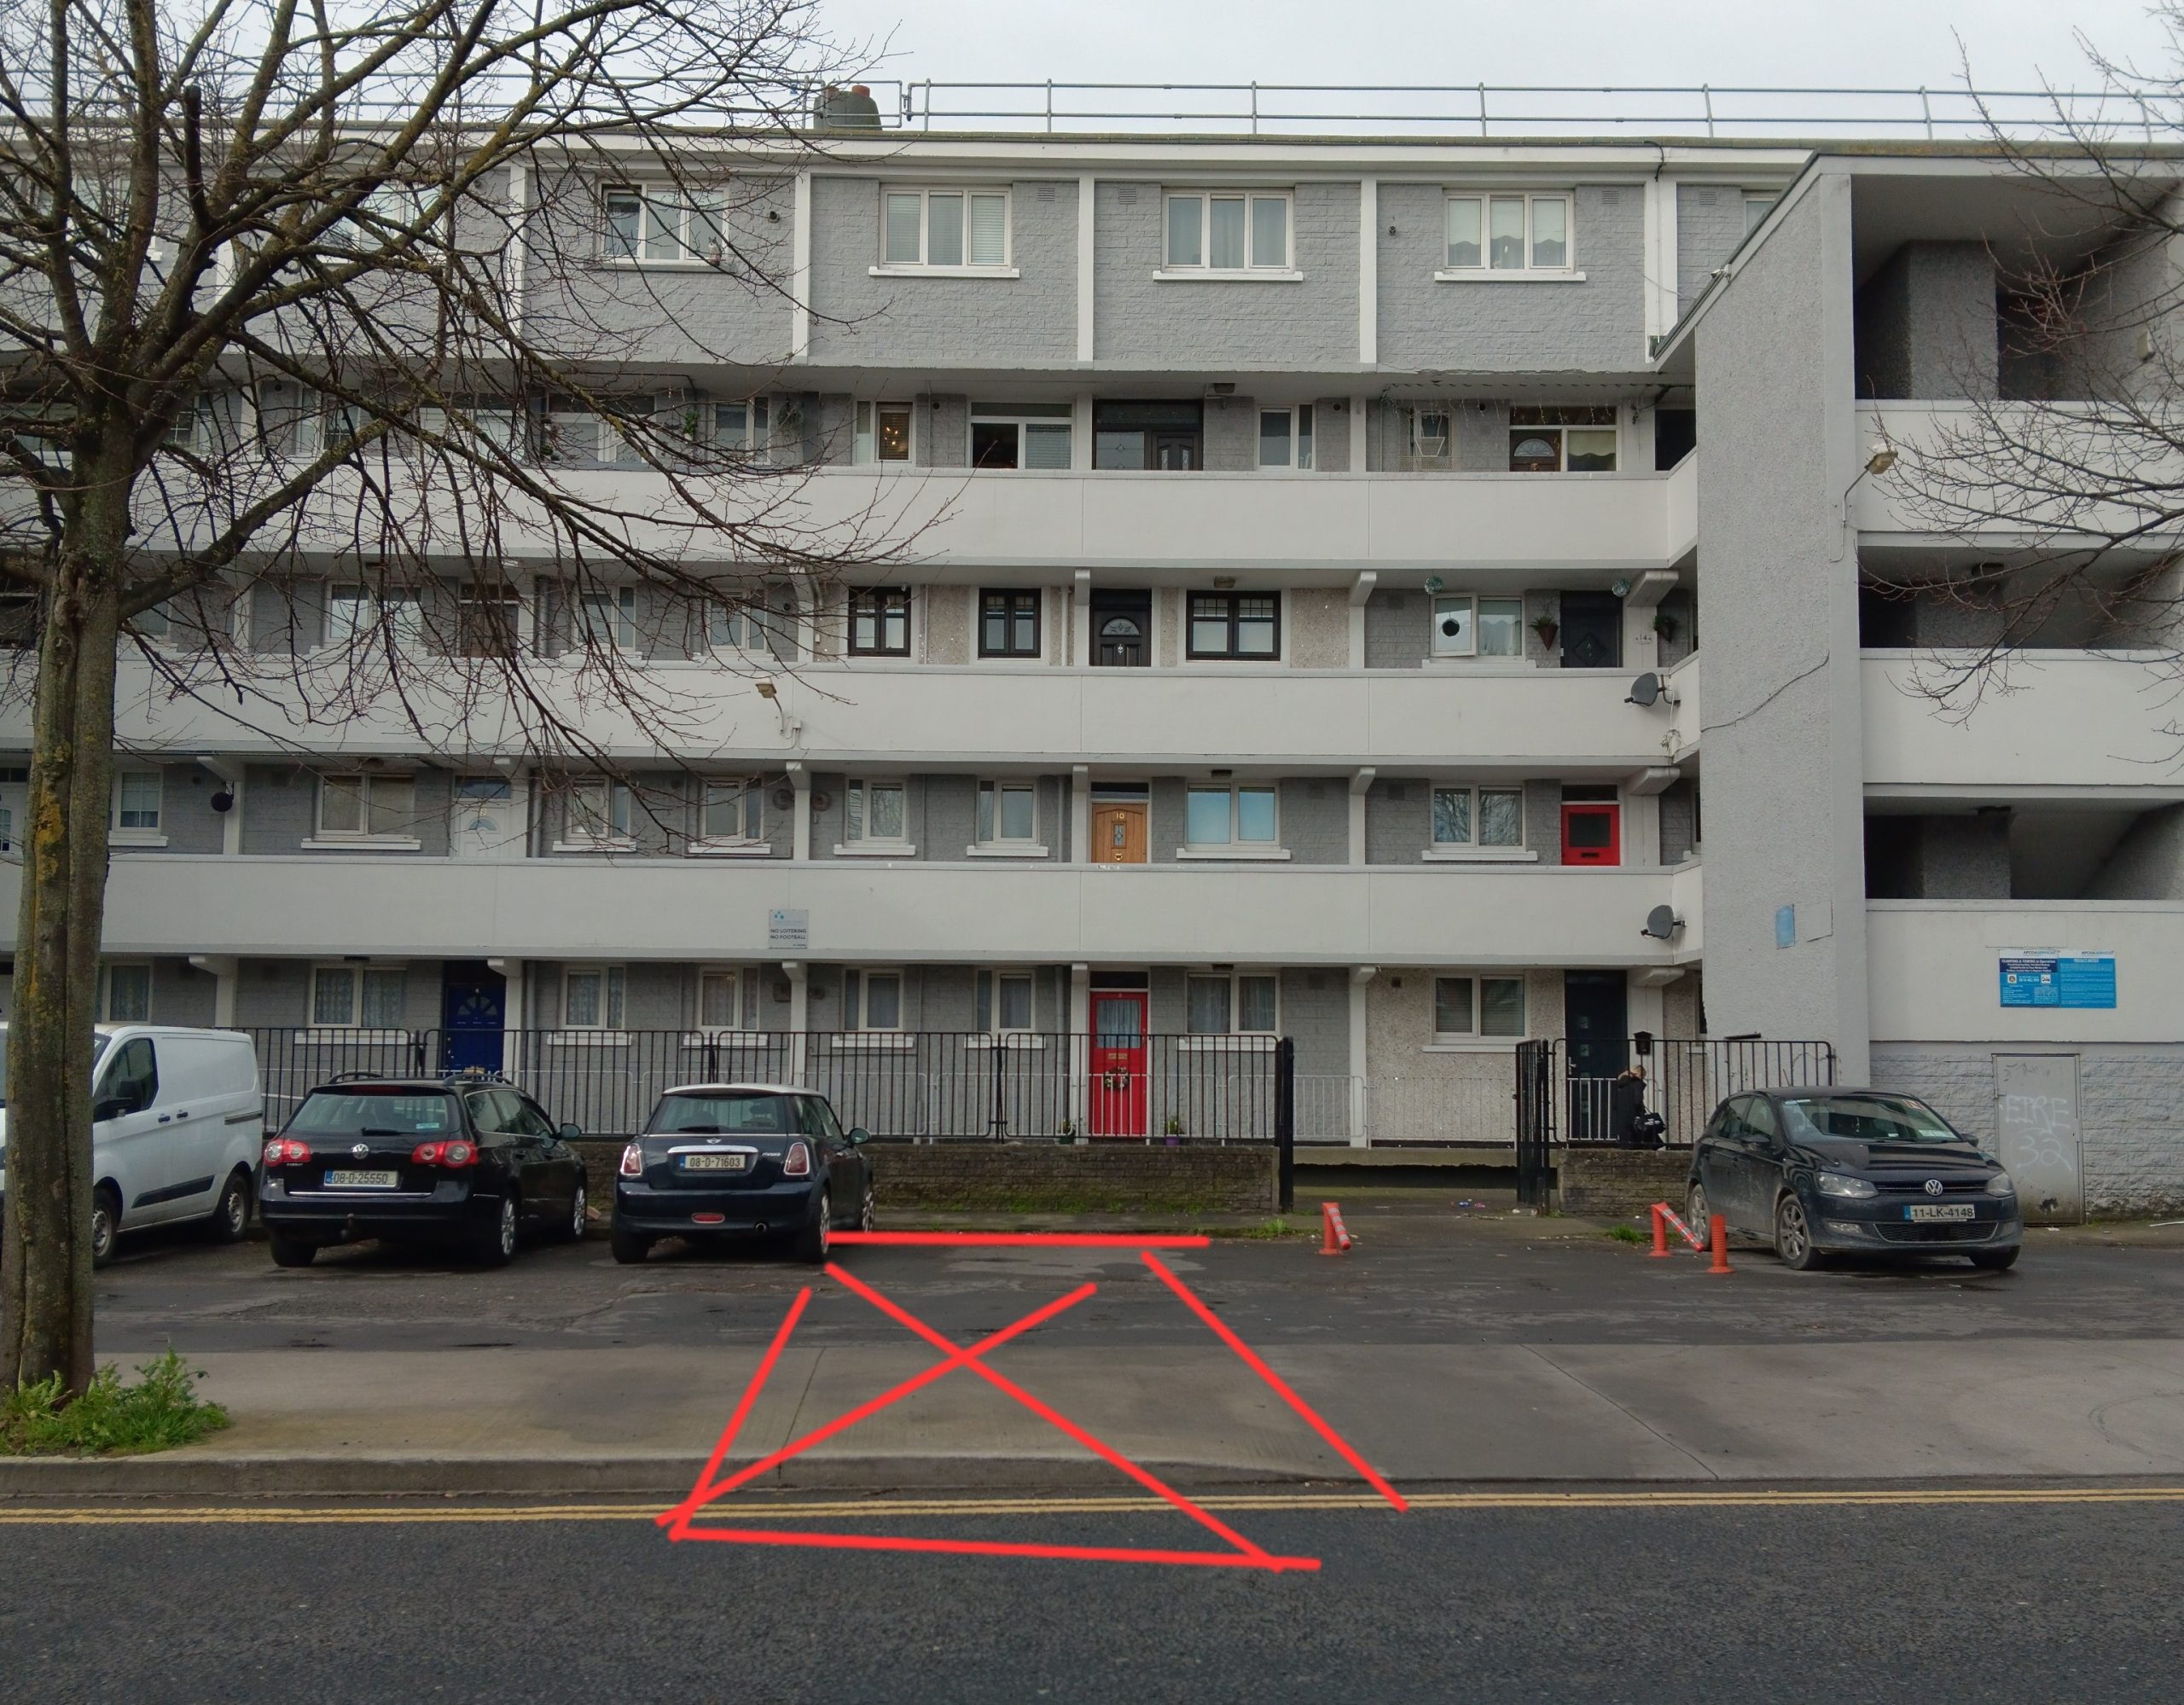 Image of Pimlico flats in Dublin 8 with a overlay of a red marking on the ground in front which symbolises where James Connolly's house once stood.